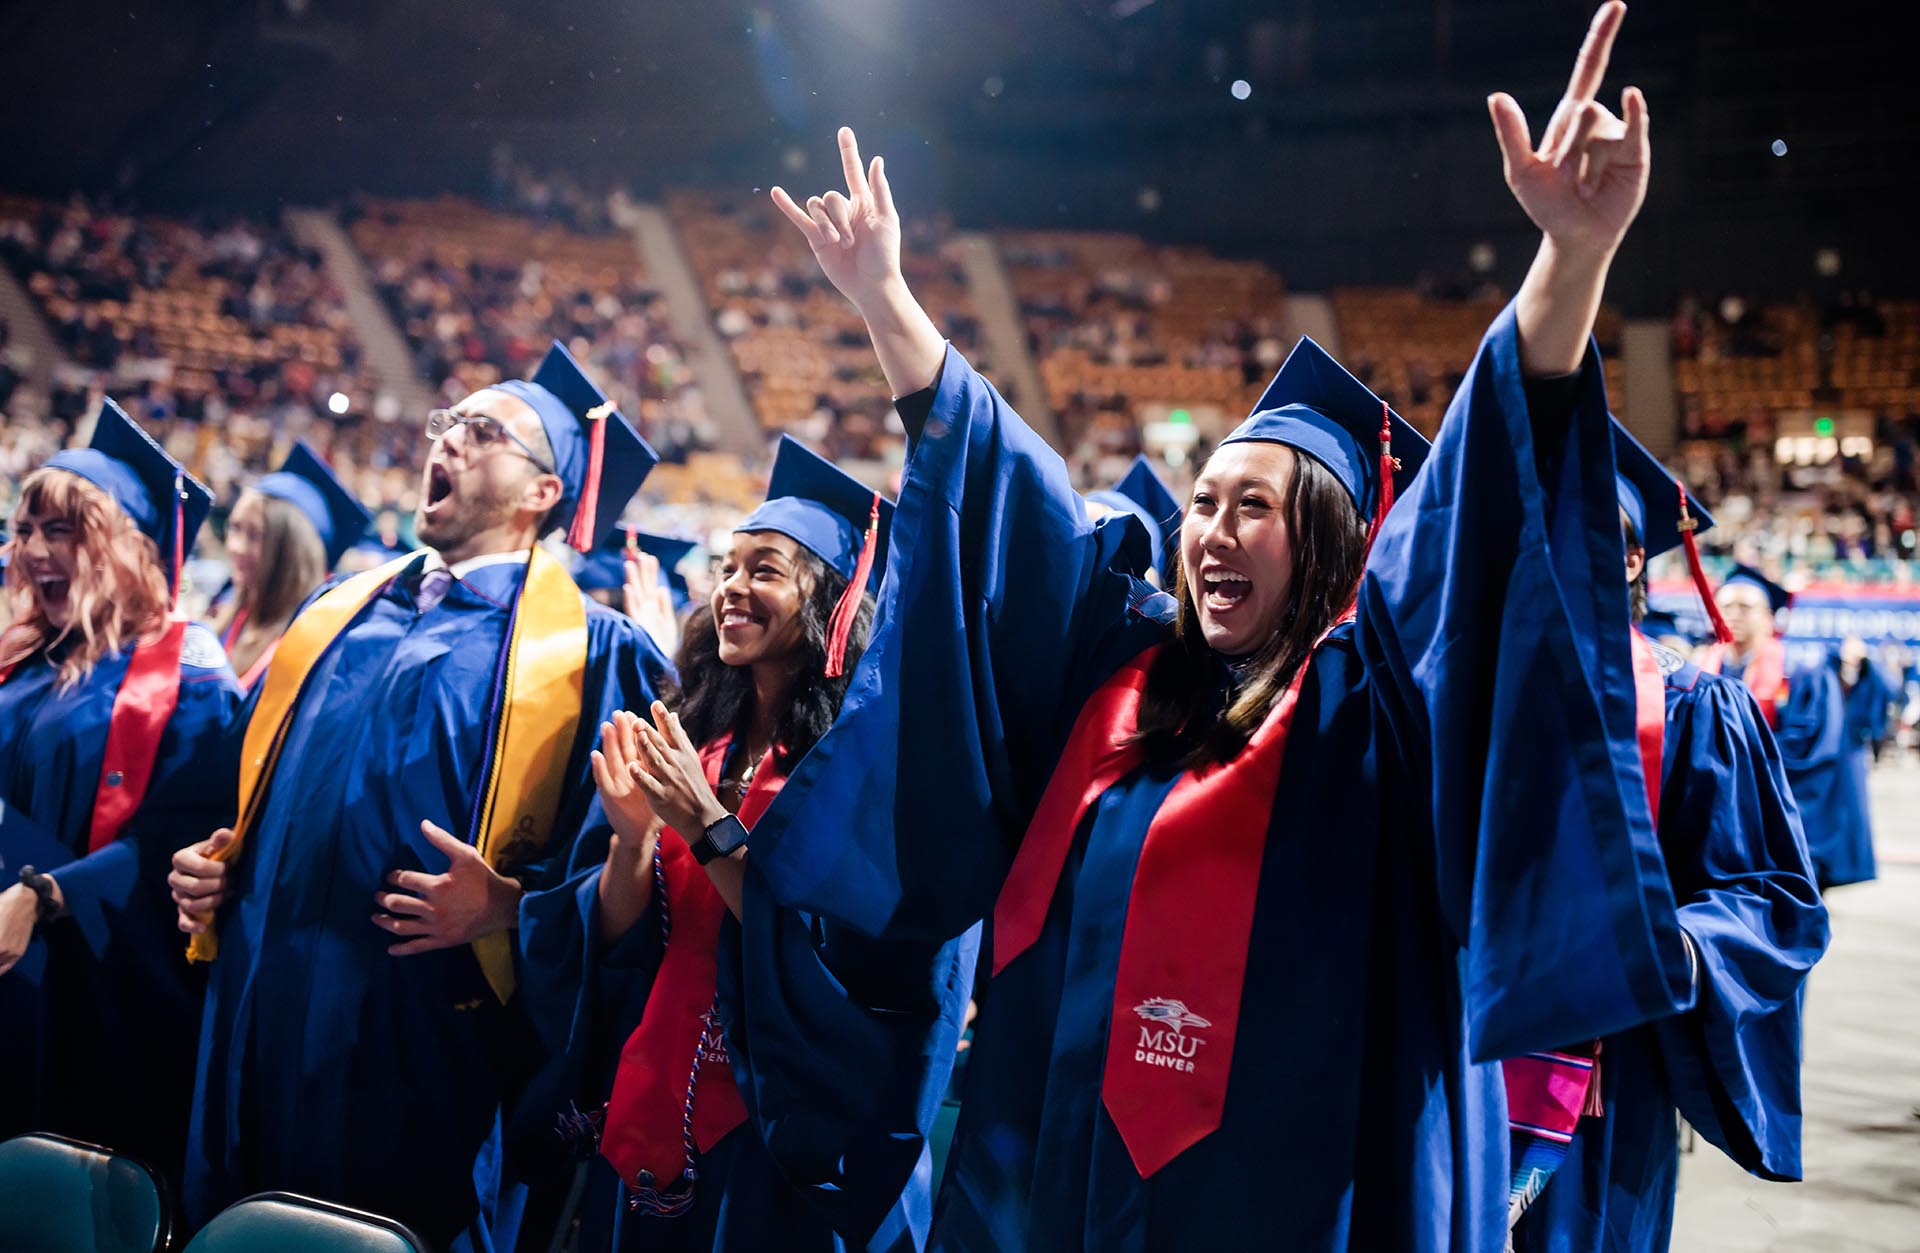 MSU Denver graduates celebrate at the end of the spring 2023 commencement ceremony.